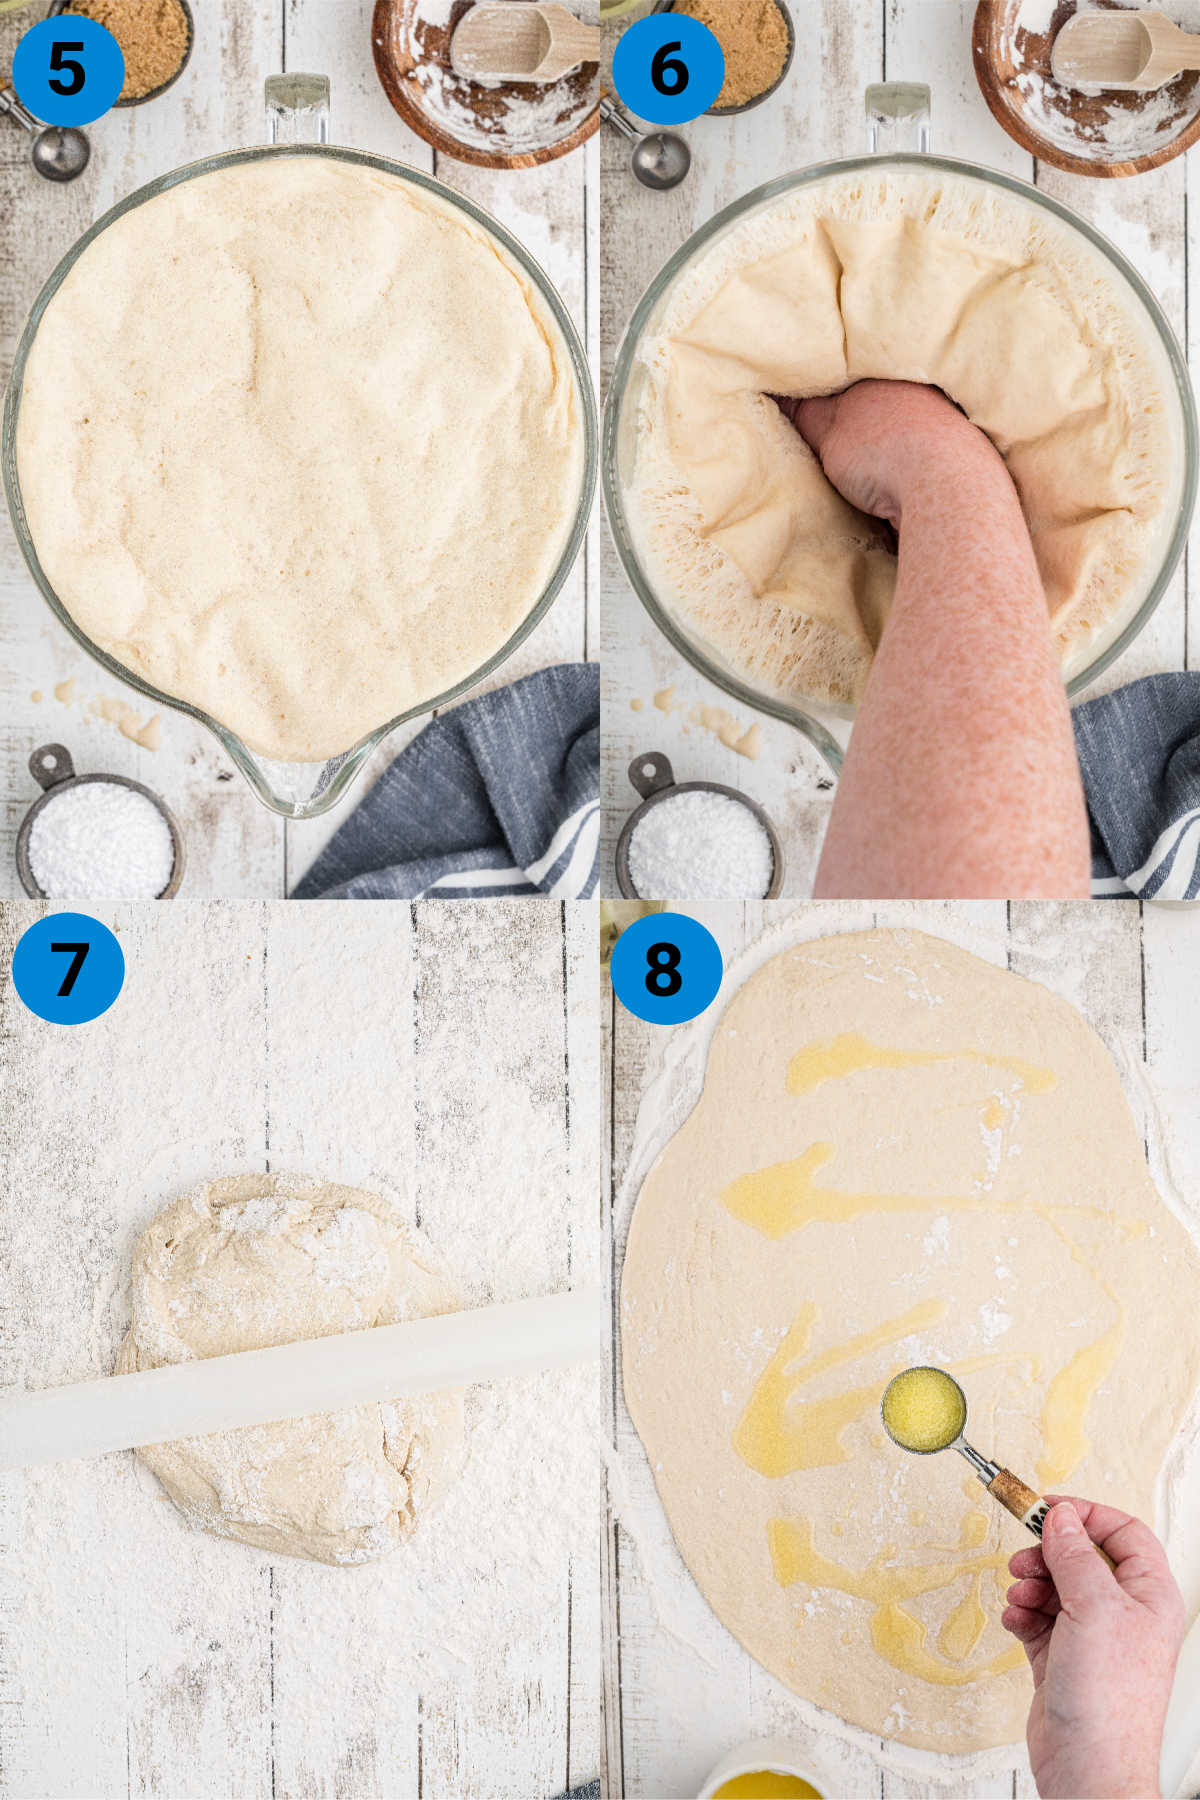 A collage of four images showing how to make Amish Cinnamon rolls, steps 5-8.